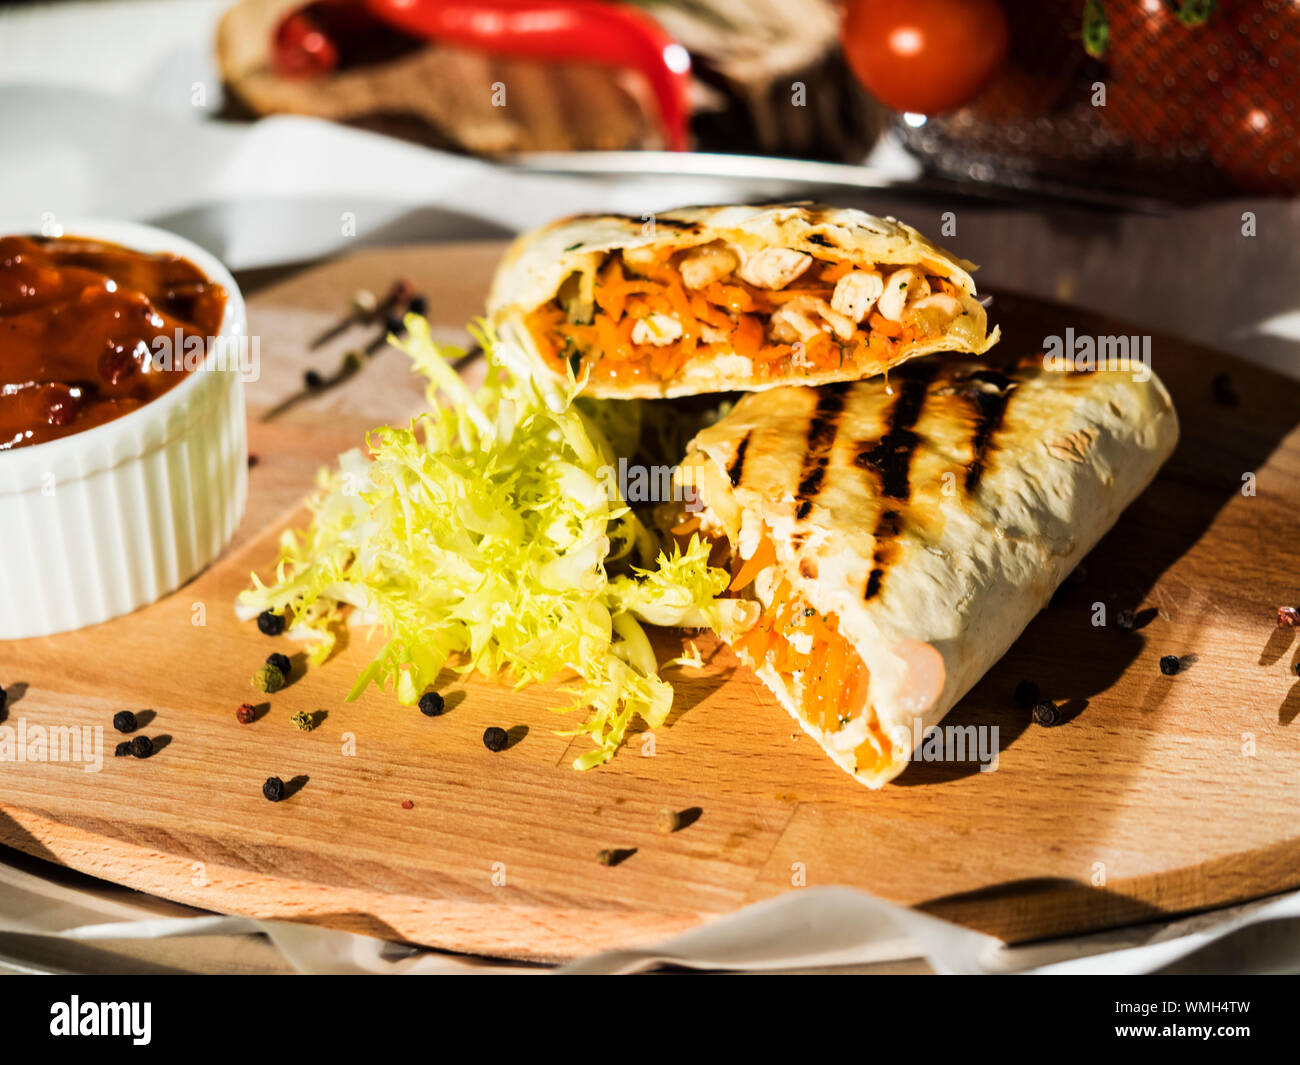 Close-up Food Served On Cutting Board Stock Photo